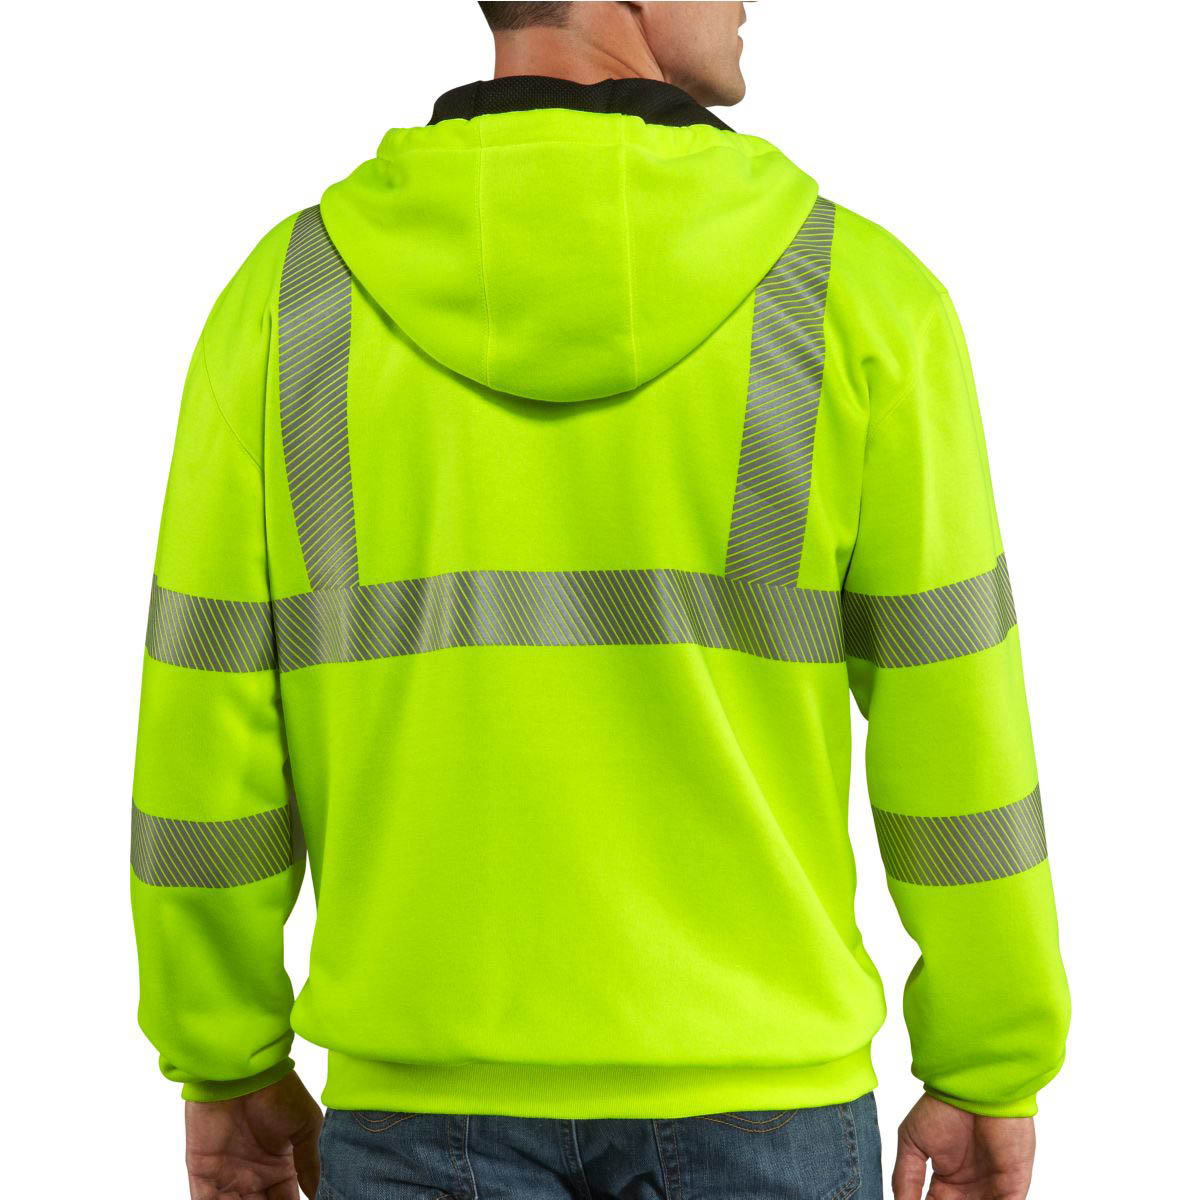 Carhartt Men's High Visibility Zip Front Class 3 Thermal Lined Sweatshirt